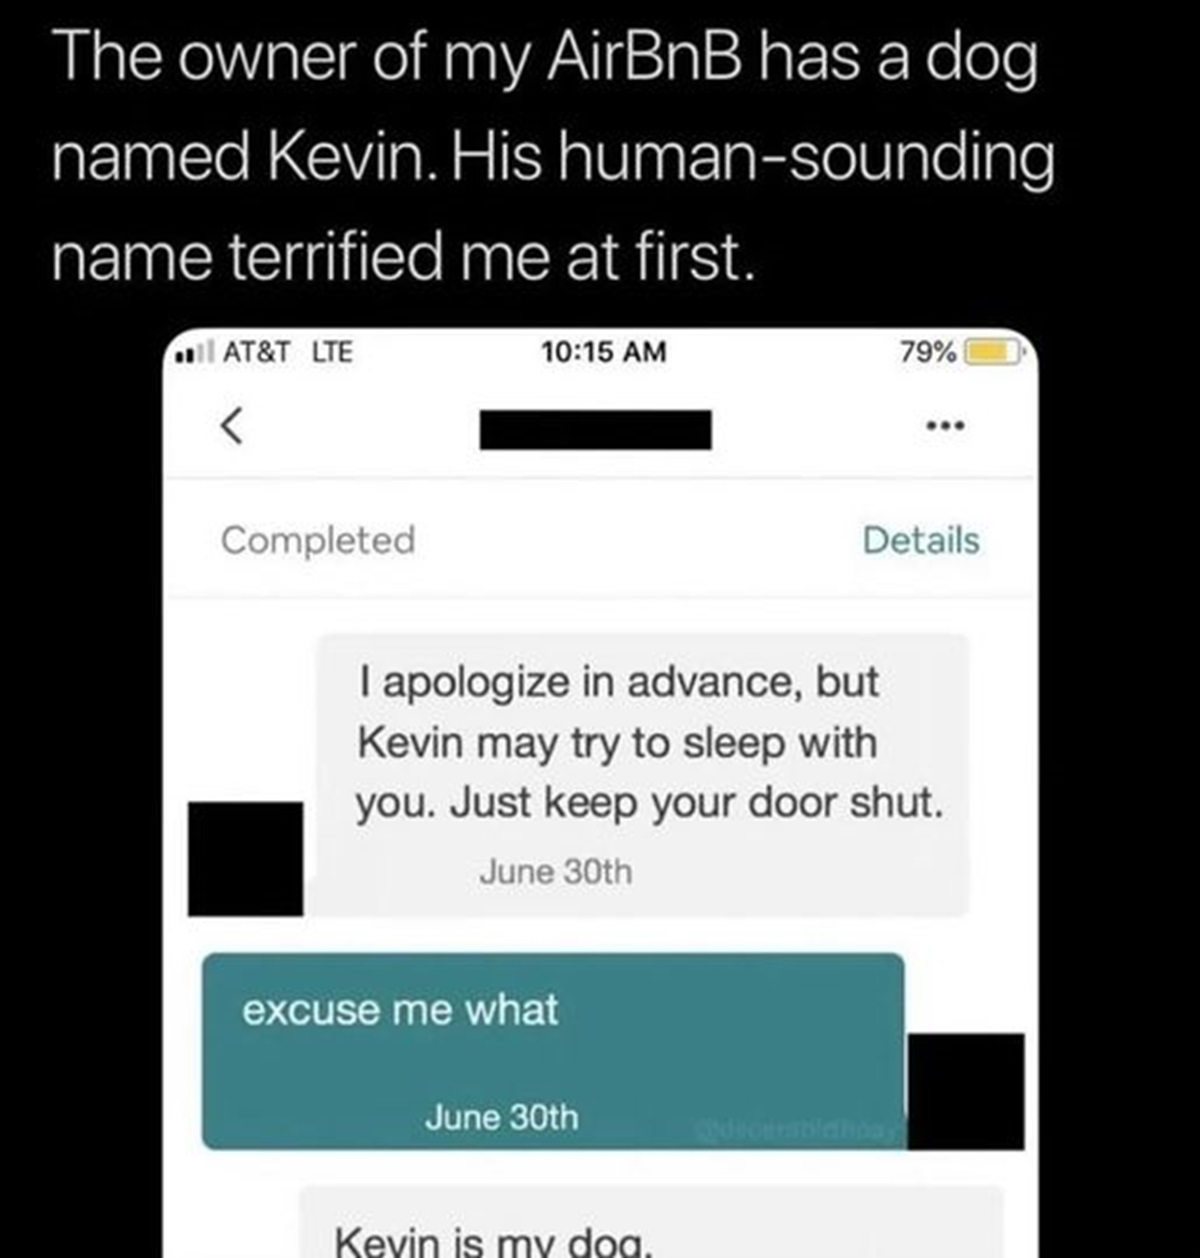 screenshot - The owner of my AirBnB has a dog named Kevin. His humansounding name terrified me at first. At&T Lte